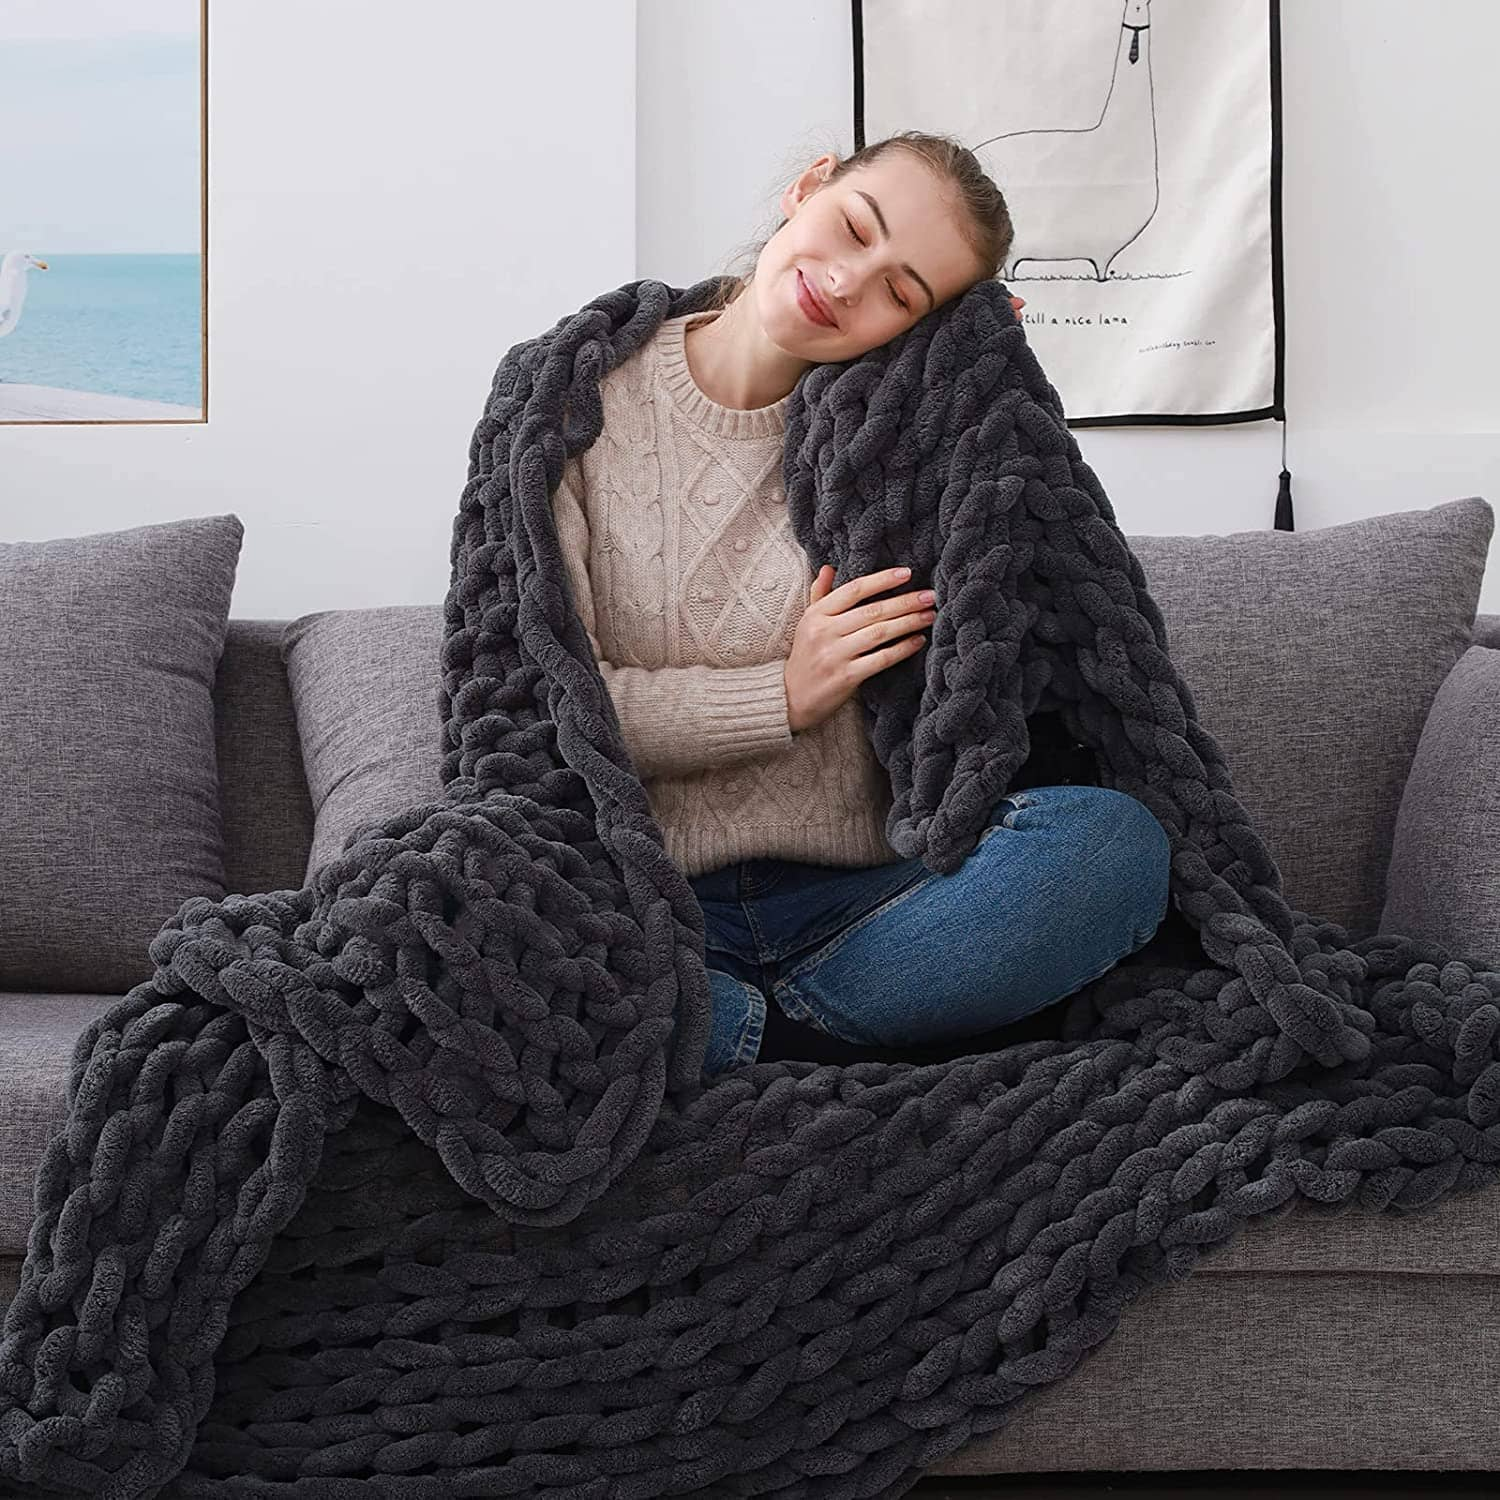 https://www.kuangsglobal.com/chunky-knit- Blanket-throw-100-hand-knit-with-chenille-yarn-50x60-cream-white-product/